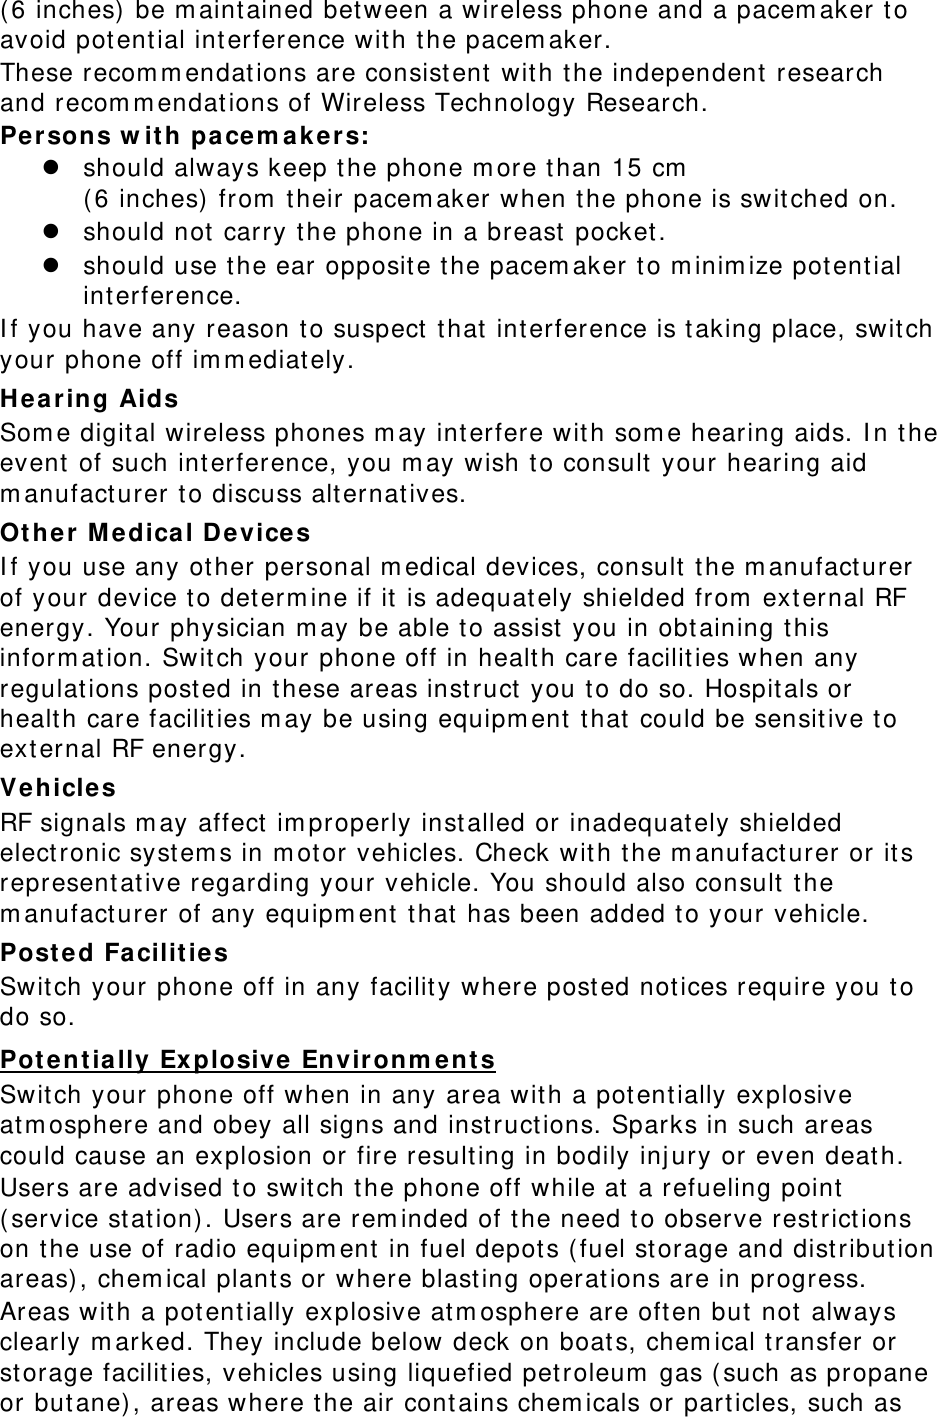 (6 inches) be maintained between a wireless phone and a pacemaker to avoid potential interference with the pacemaker. These recommendations are consistent with the independent research and recommendations of Wireless Technology Research. Persons with pacemakers: z should always keep the phone more than 15 cm  (6 inches) from their pacemaker when the phone is switched on. z should not carry the phone in a breast pocket. z should use the ear opposite the pacemaker to minimize potential interference. If you have any reason to suspect that interference is taking place, switch your phone off immediately. Hearing Aids Some digital wireless phones may interfere with some hearing aids. In the event of such interference, you may wish to consult your hearing aid manufacturer to discuss alternatives. Other Medical Devices If you use any other personal medical devices, consult the manufacturer of your device to determine if it is adequately shielded from external RF energy. Your physician may be able to assist you in obtaining this information. Switch your phone off in health care facilities when any regulations posted in these areas instruct you to do so. Hospitals or health care facilities may be using equipment that could be sensitive to external RF energy. Vehicles RF signals may affect improperly installed or inadequately shielded electronic systems in motor vehicles. Check with the manufacturer or its representative regarding your vehicle. You should also consult the manufacturer of any equipment that has been added to your vehicle. Posted Facilities Switch your phone off in any facility where posted notices require you to do so. Potentially Explosive Environments Switch your phone off when in any area with a potentially explosive atmosphere and obey all signs and instructions. Sparks in such areas could cause an explosion or fire resulting in bodily injury or even death. Users are advised to switch the phone off while at a refueling point (service station). Users are reminded of the need to observe restrictions on the use of radio equipment in fuel depots (fuel storage and distribution areas), chemical plants or where blasting operations are in progress. Areas with a potentially explosive atmosphere are often but not always clearly marked. They include below deck on boats, chemical transfer or storage facilities, vehicles using liquefied petroleum gas (such as propane or butane), areas where the air contains chemicals or particles, such as 